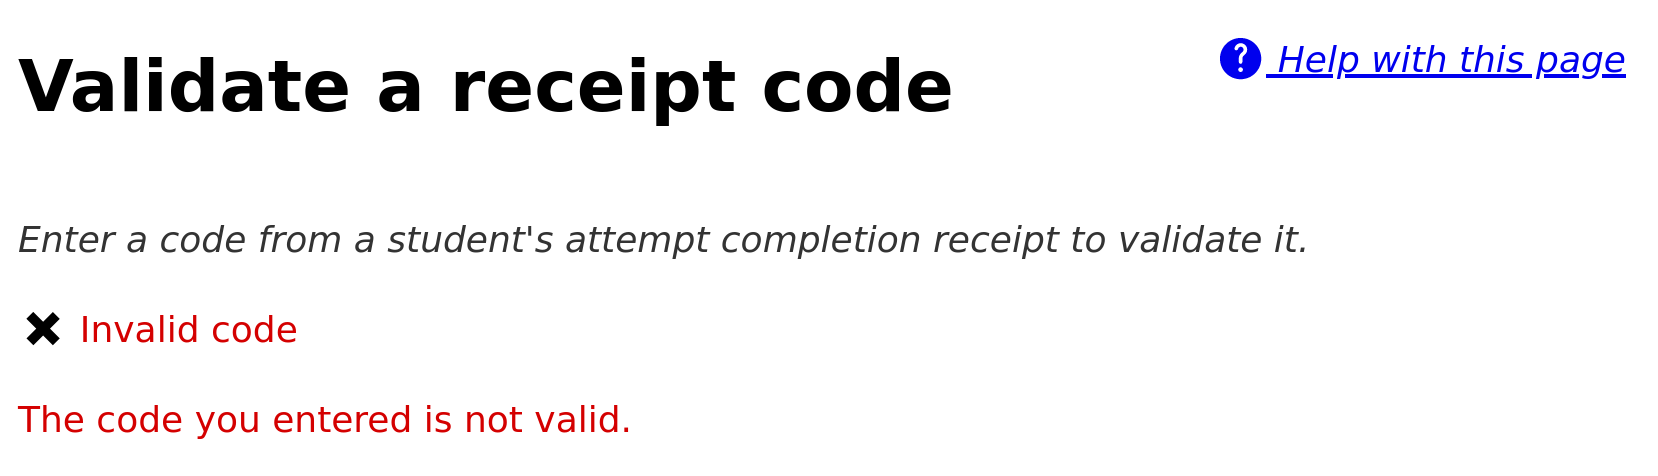 A page headed "Validate receipt code". There is a red cross and the message "Invalid code: the code you entered is not valid."